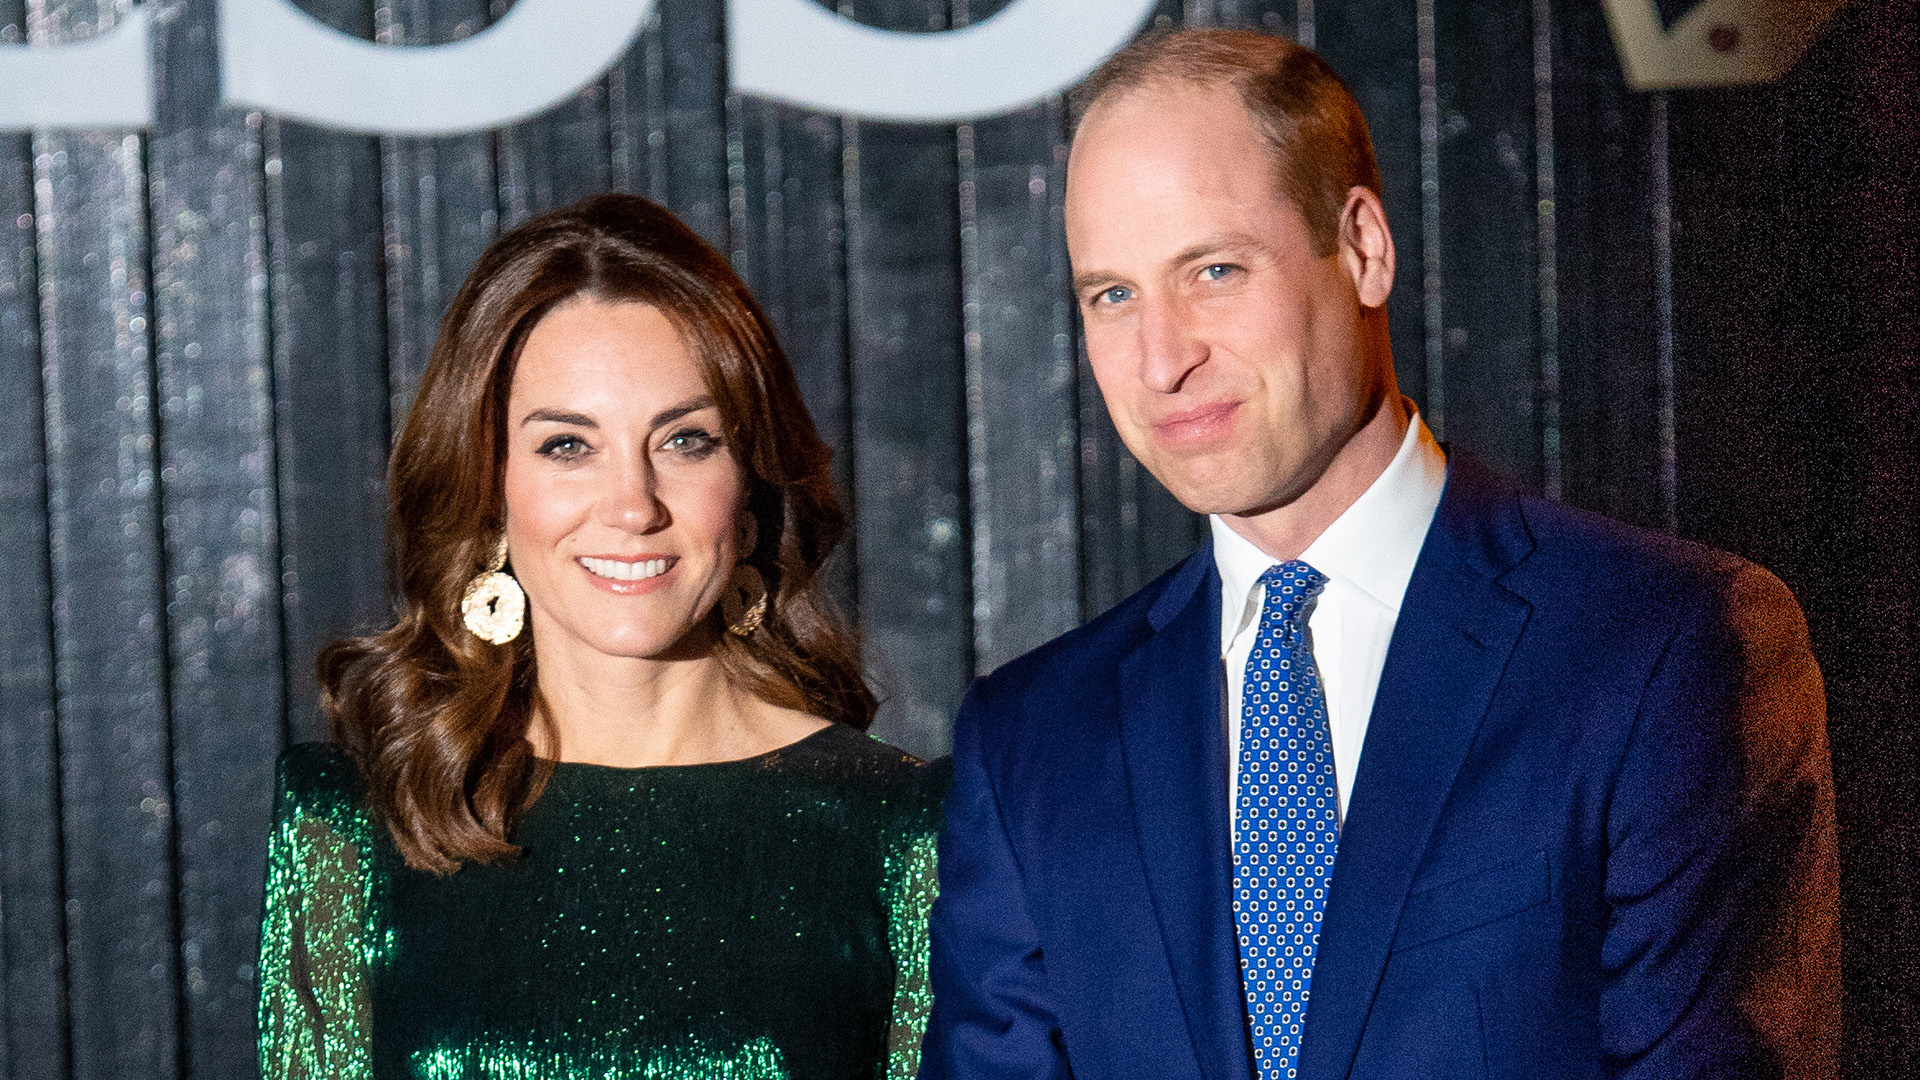 Who Did Prince William Date Before Marrying Kate Middleton?